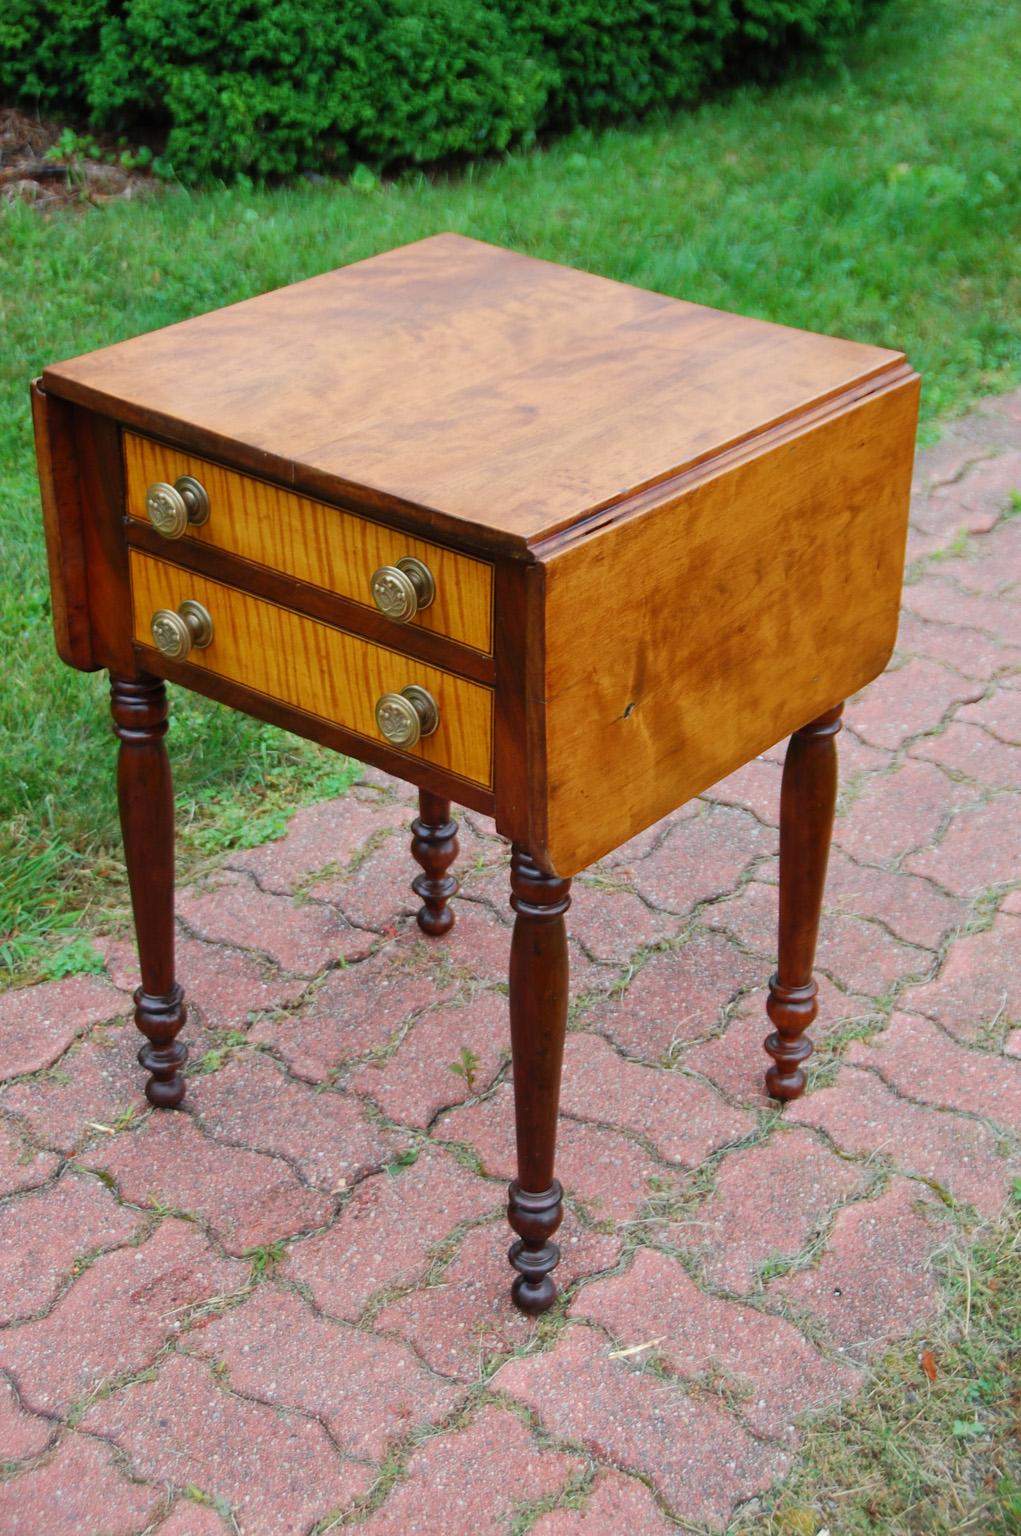 American Sheraton early 19th century dropleaf two drawer side or end table. This sophisticated country table has a mahogany carcass and legs, the top is maple, one leaf of which has a little birdseye maple in evidence; the drawer fronts are curly